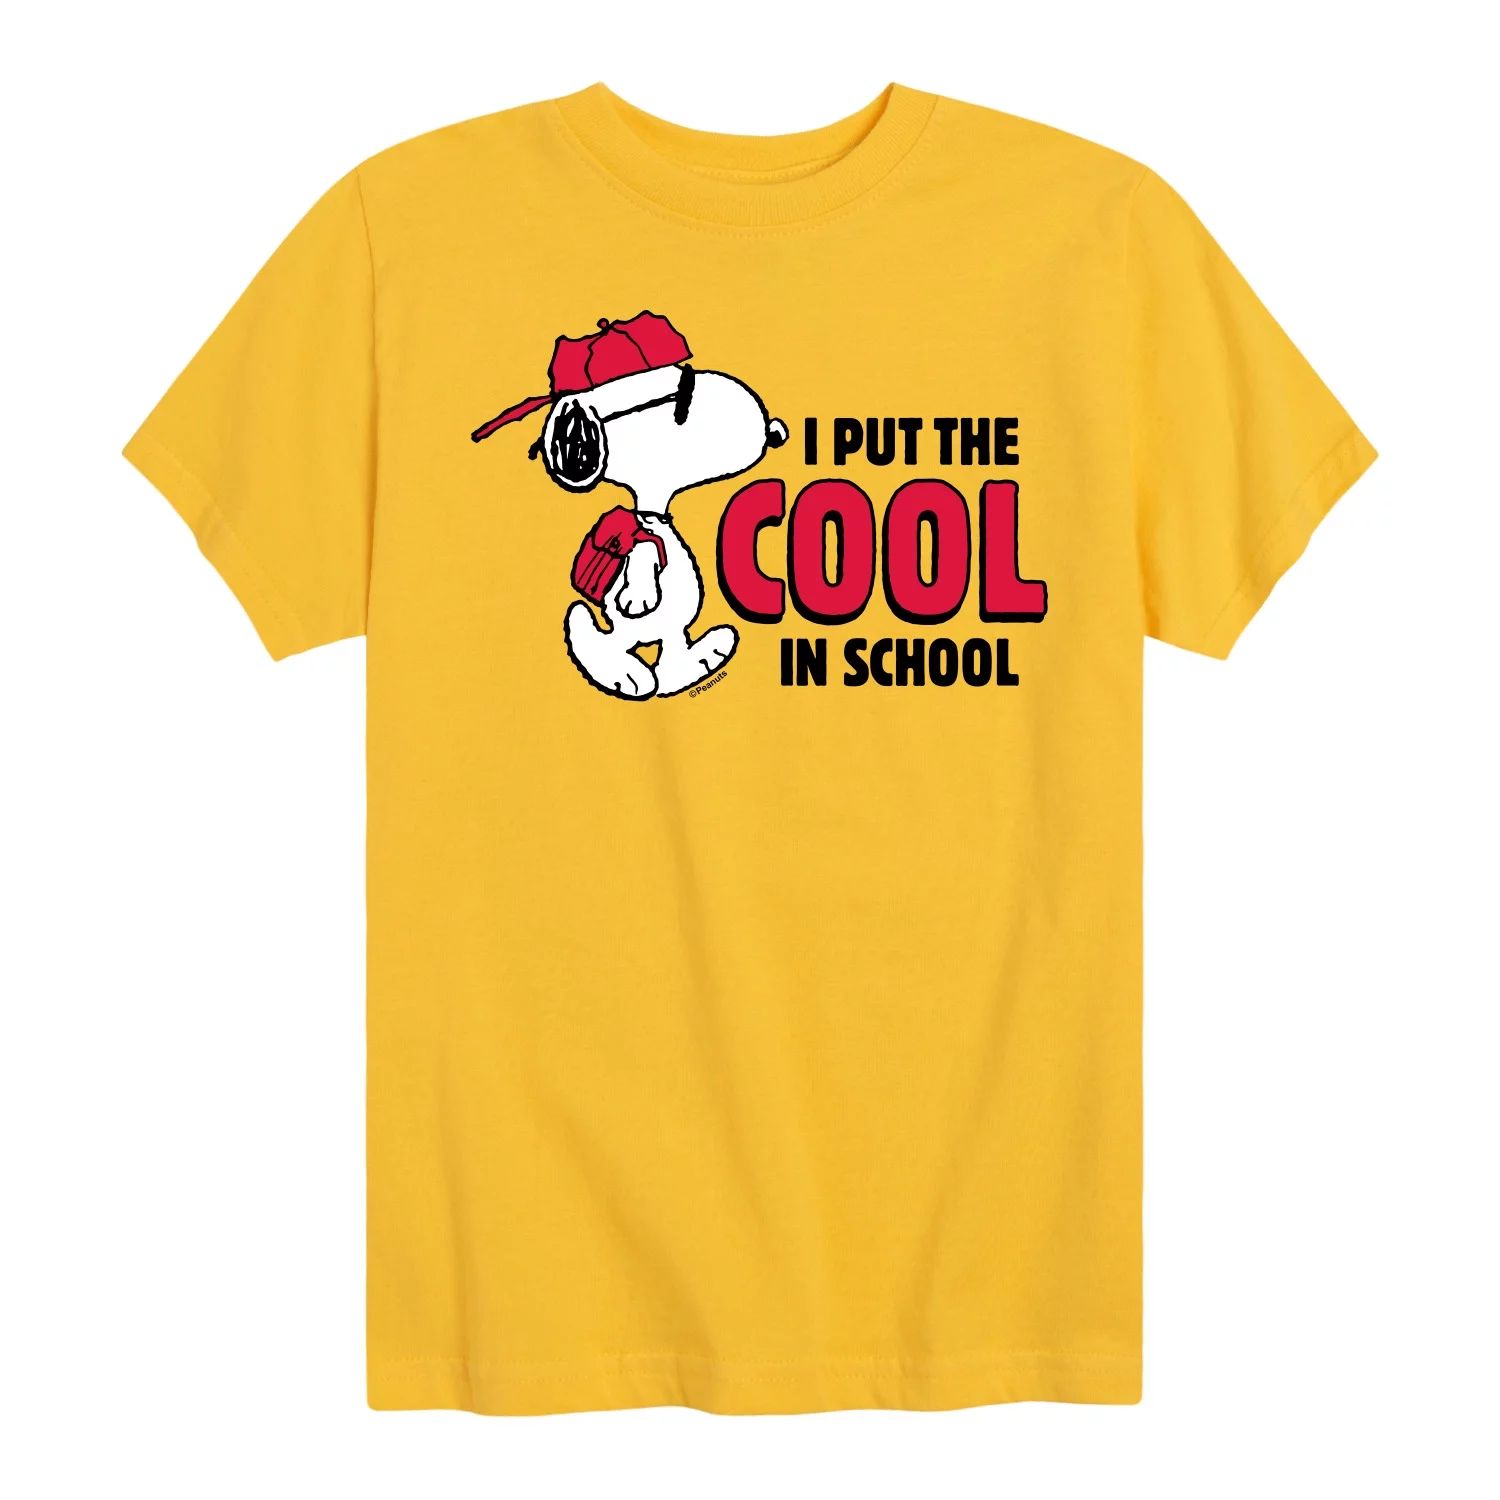 Peanuts - Snoopy - I Put the Cool in School - Toddler & Youth Short Sleeve Graphic T-Shirt | Walmart (US)